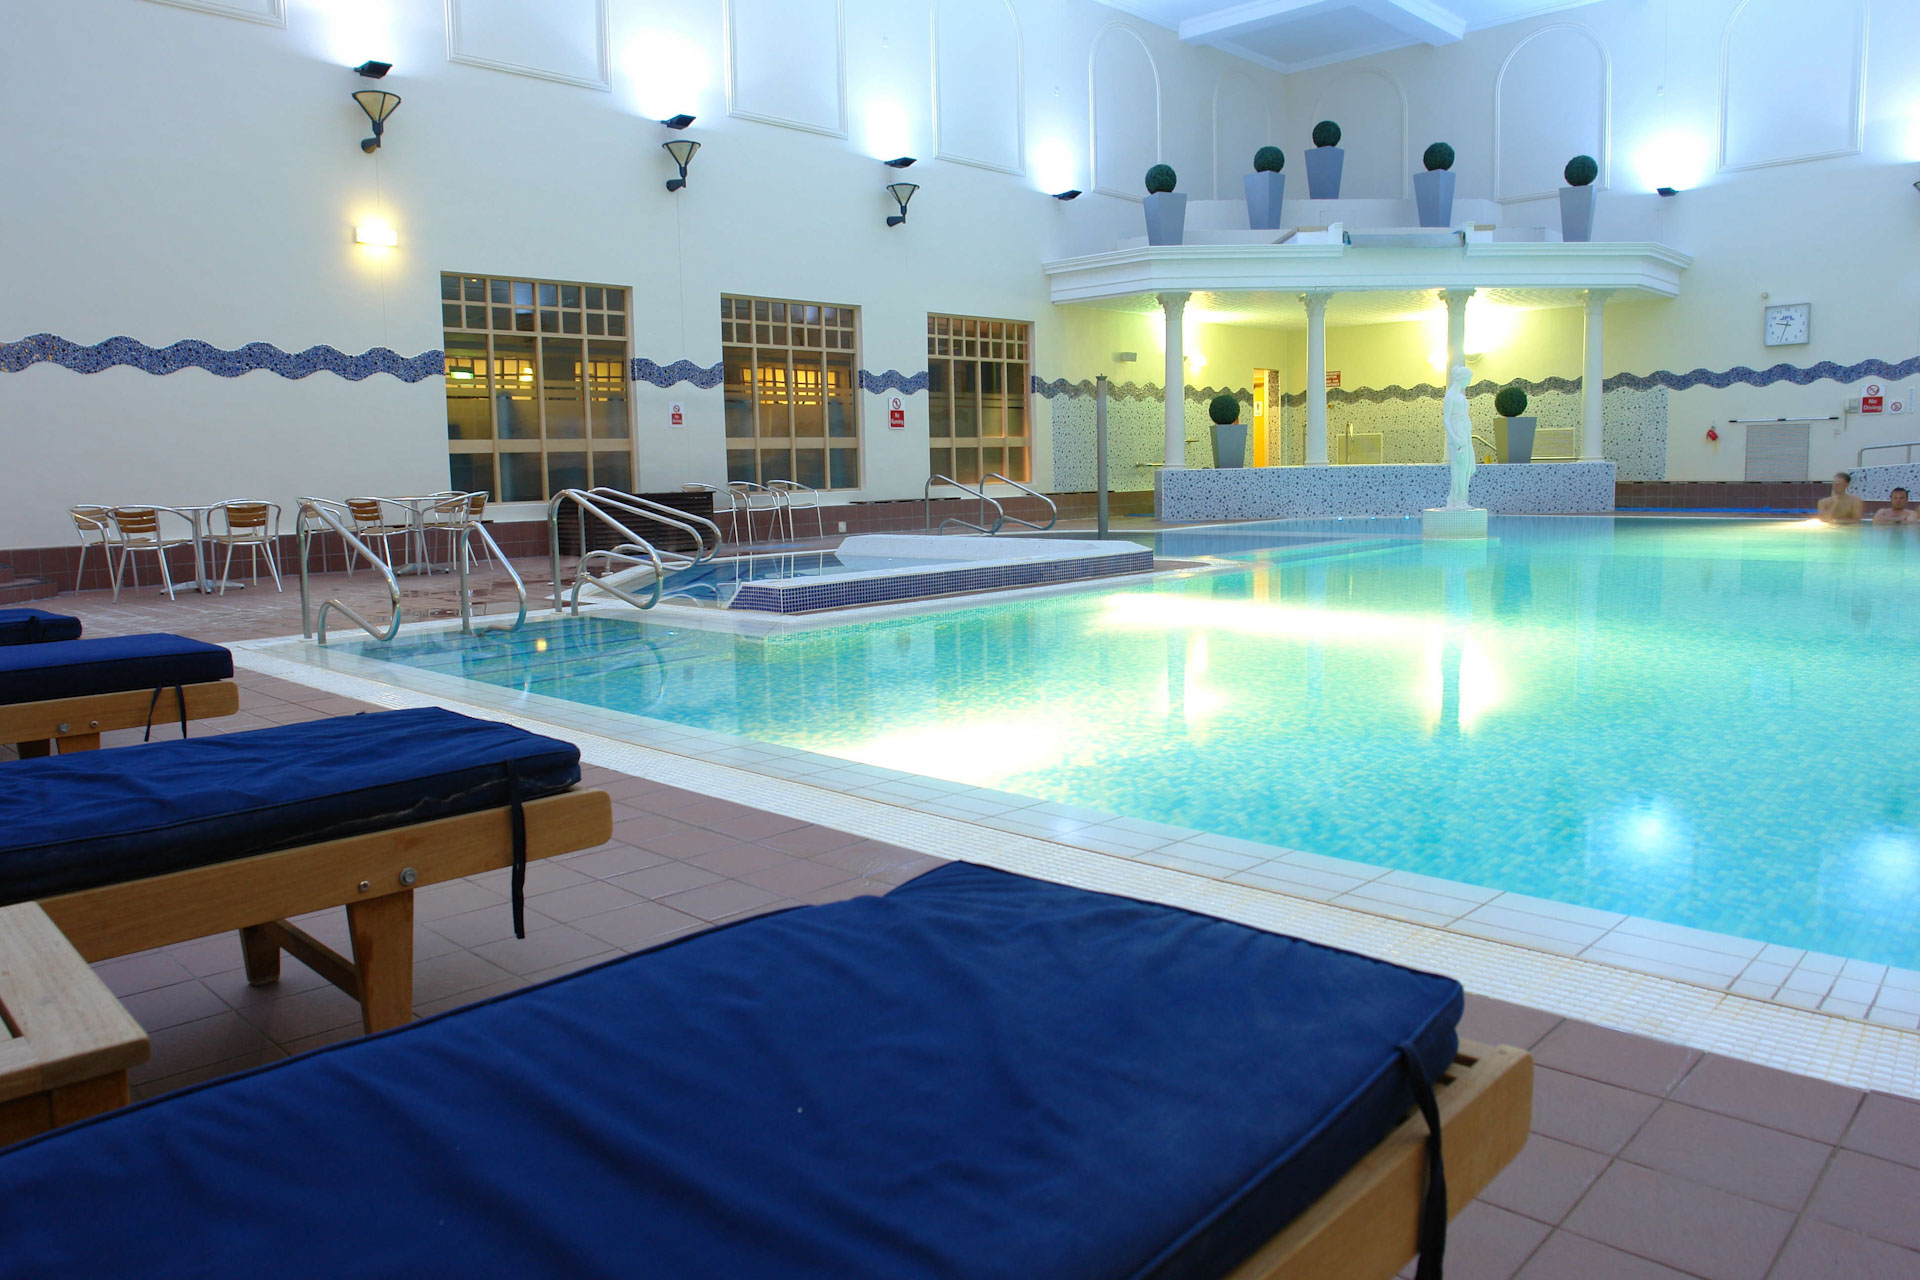 The health club at Belton Woods Hotel, Lincolnshire, England